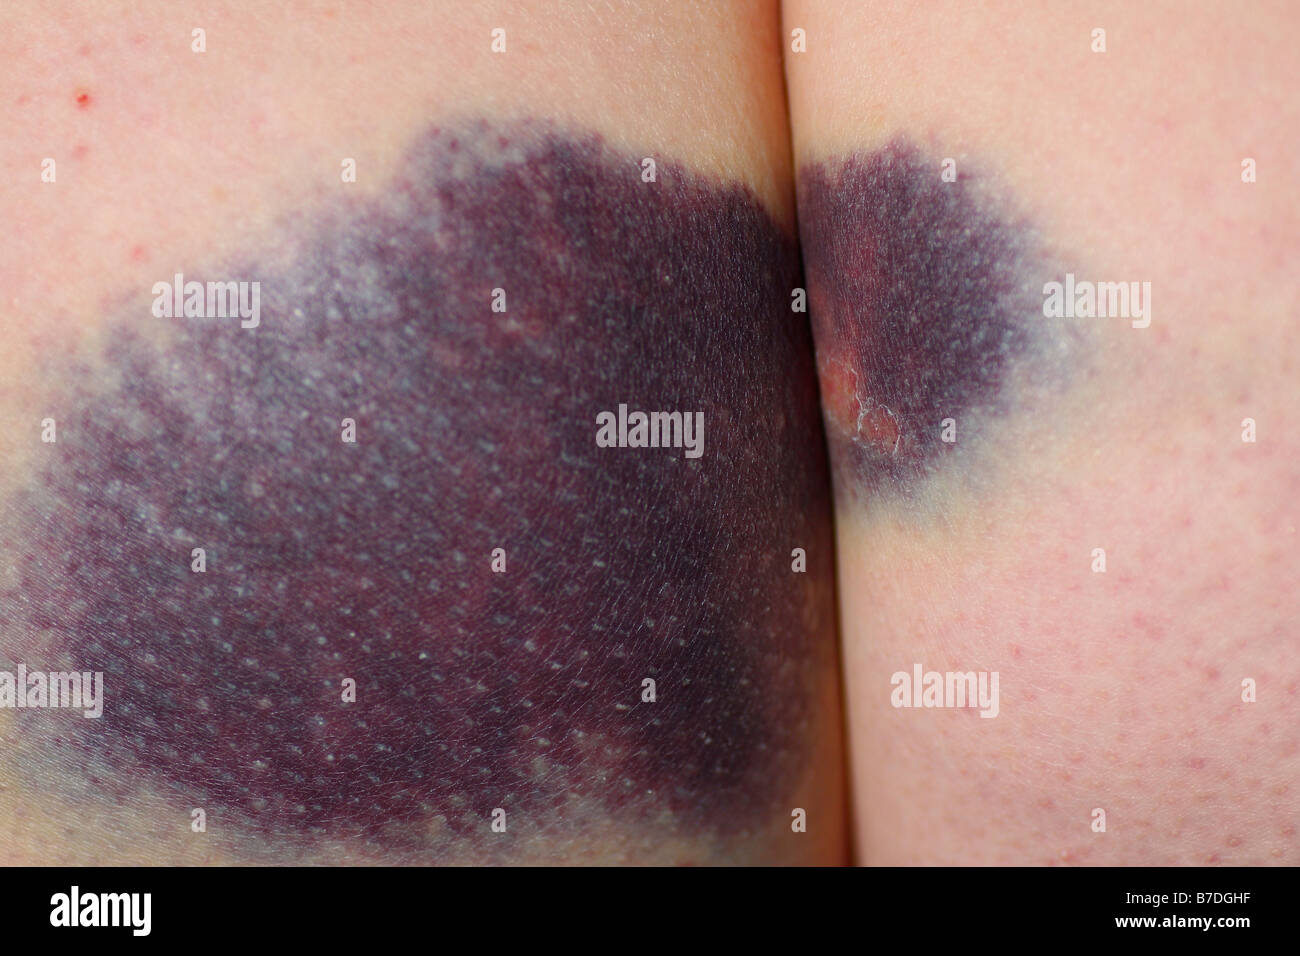 large bruise on a woman's bum or buttocks or behind or ass Stock Photo